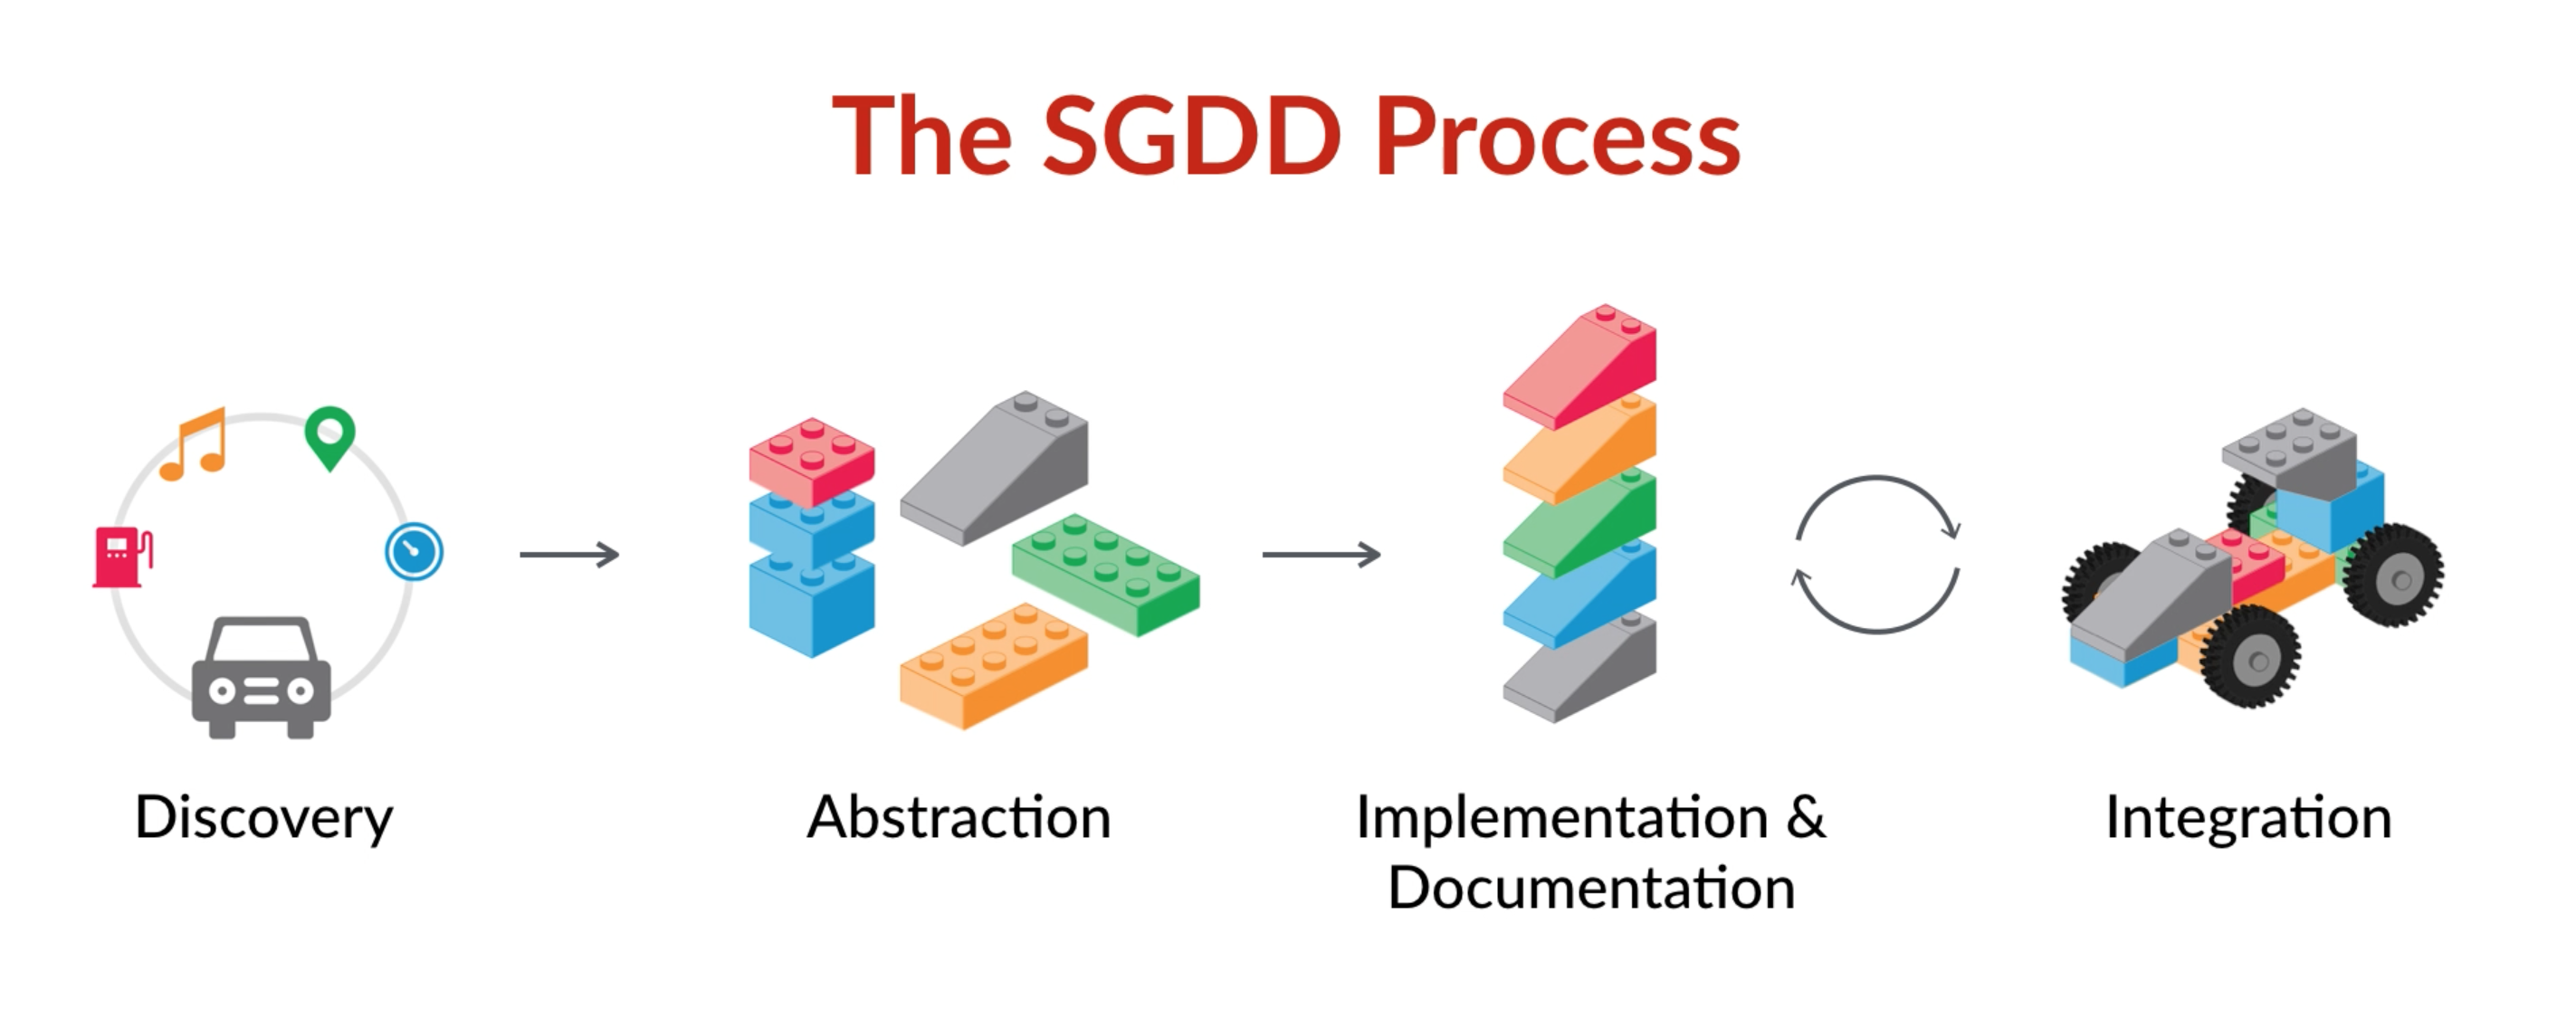 The style guide driven development process workflow